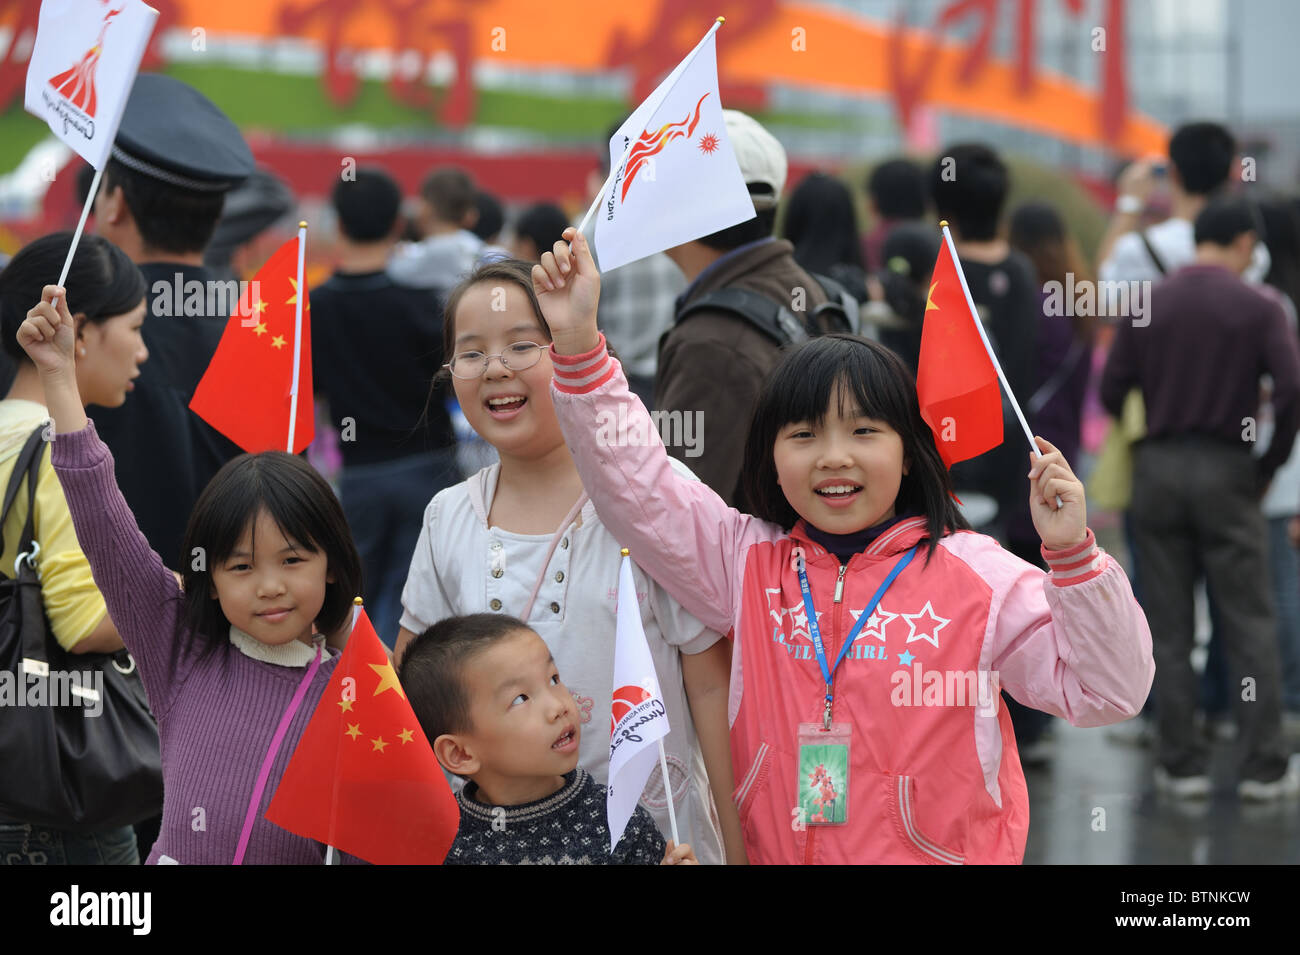 2010 Asian Games - Chinese kids cheering on China and Asian Games Stock Photo